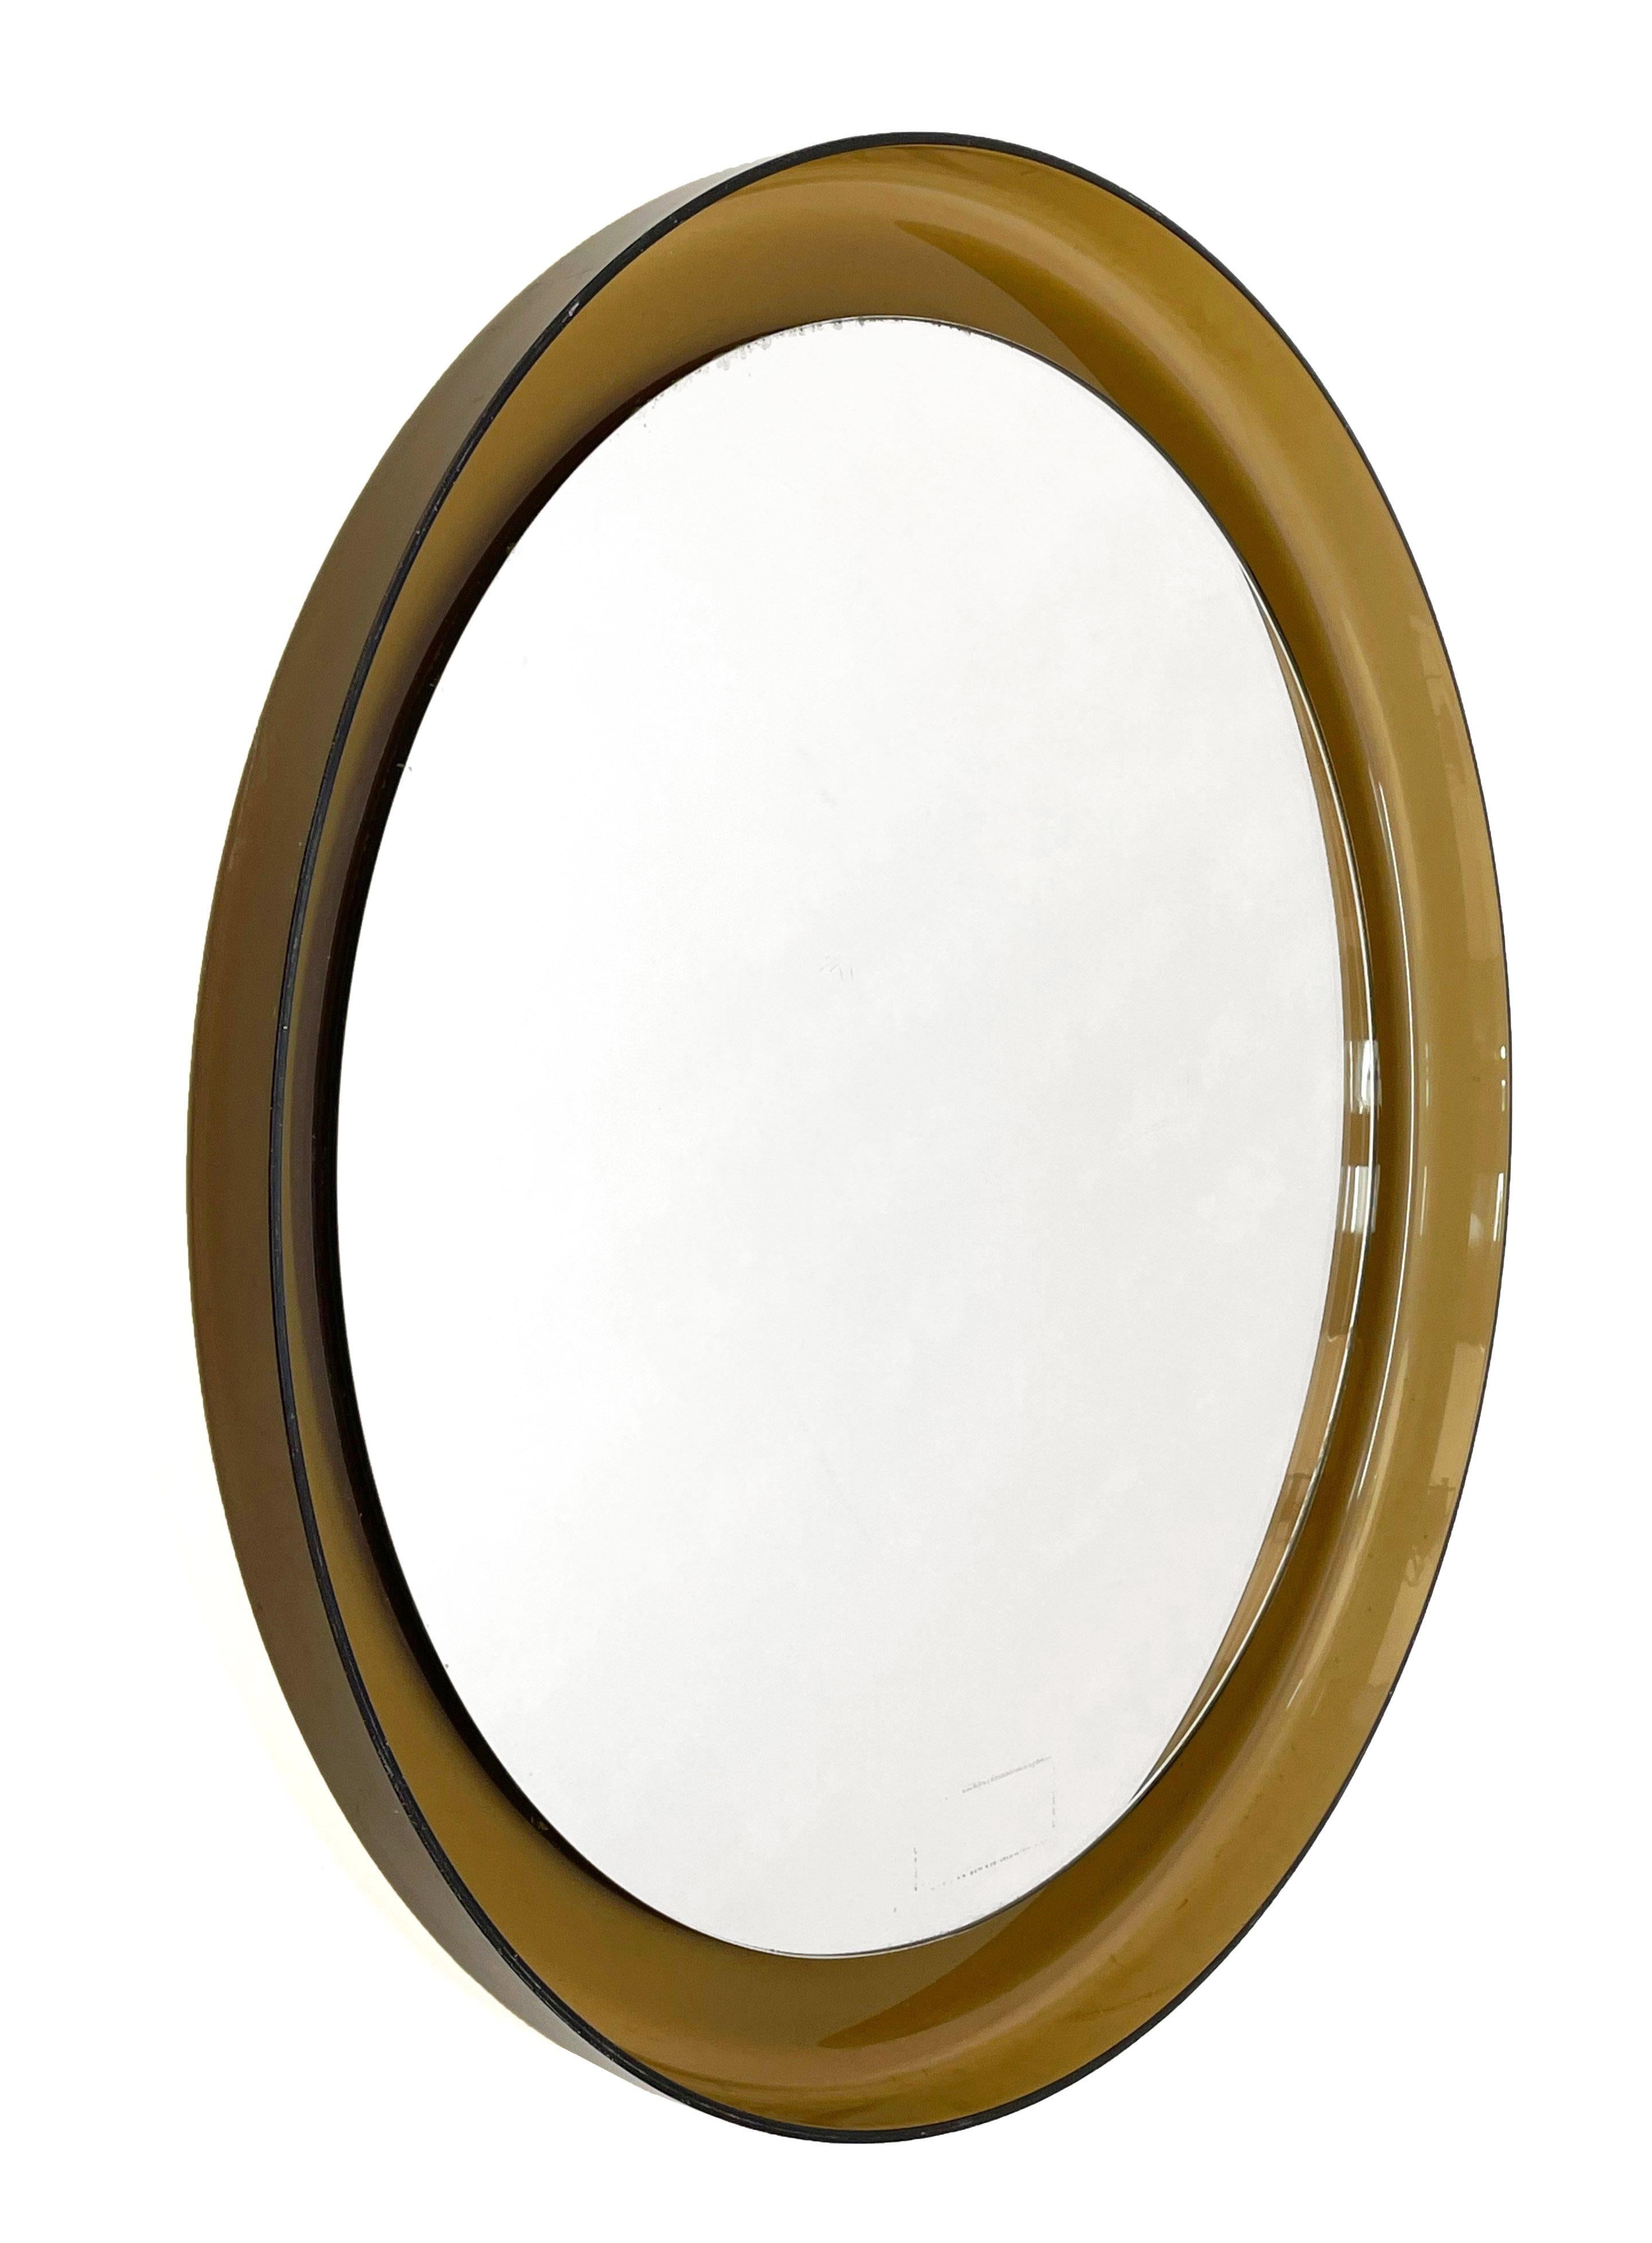 Midcentury Guzzini Italian Round Lucite Smoked Brown Wall Mirror, 1960s For Sale 3